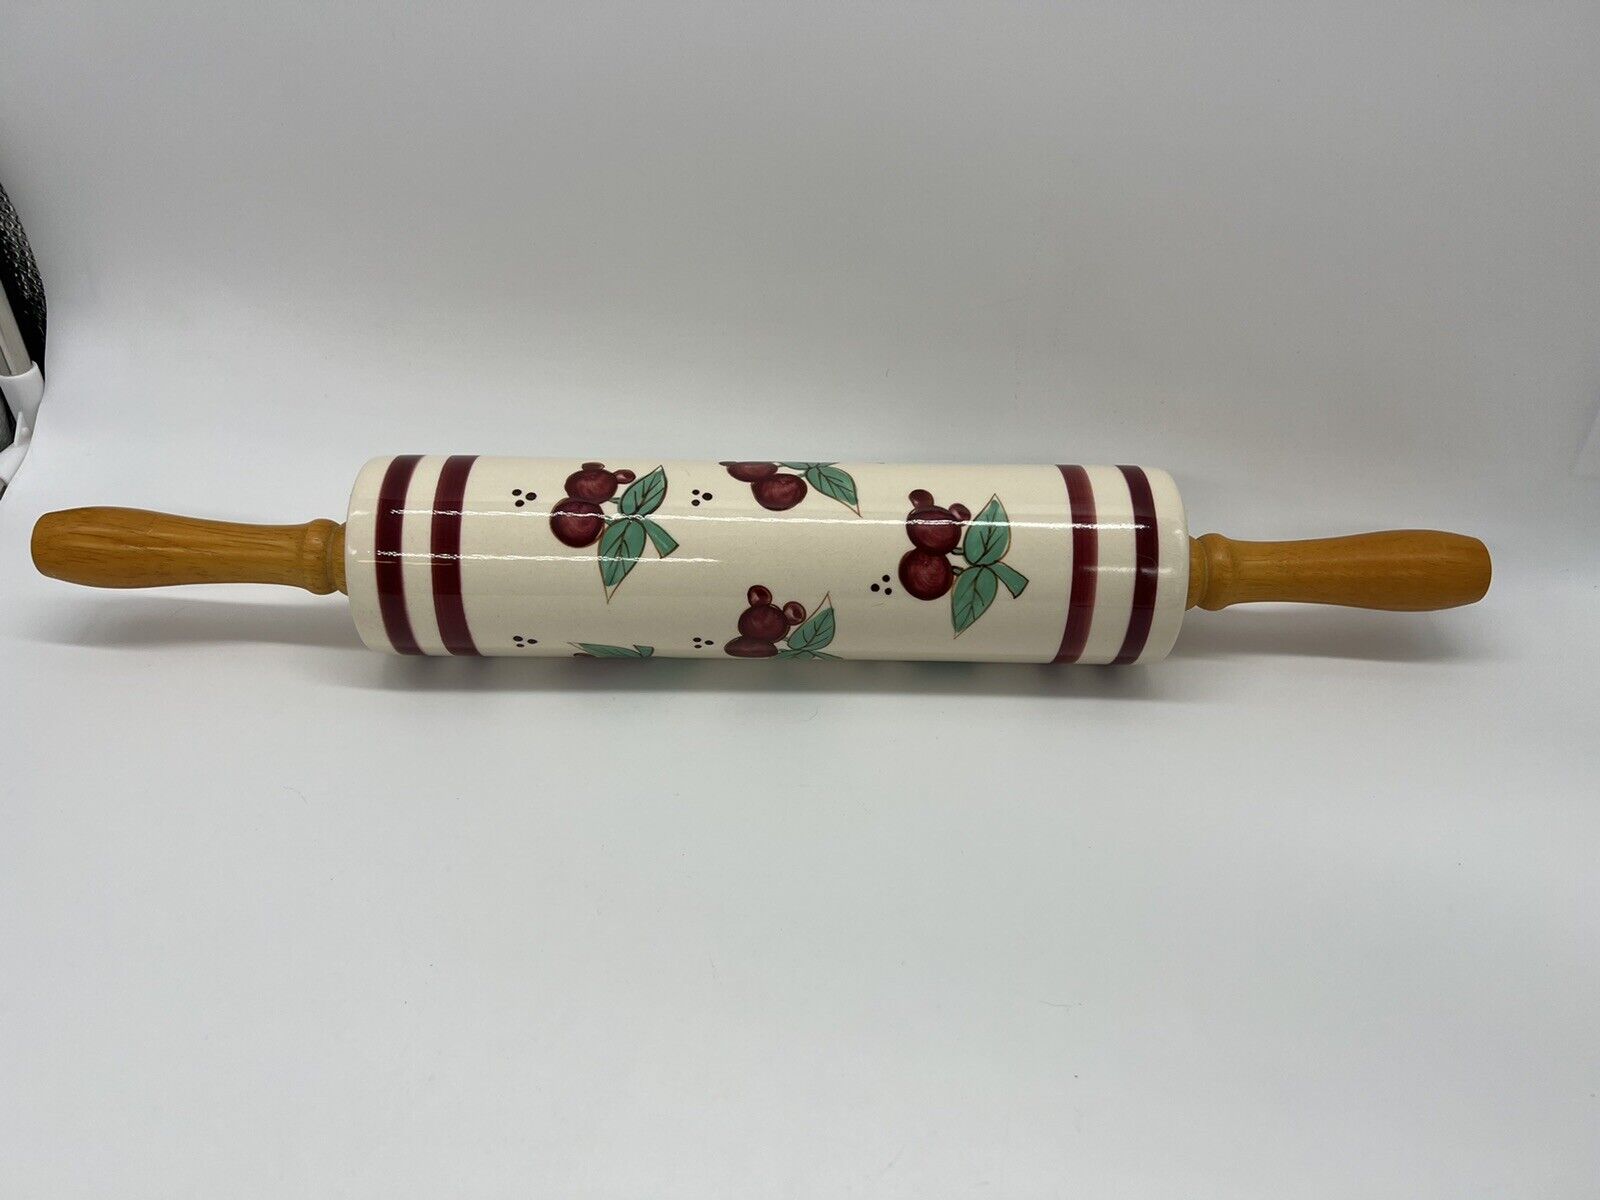 Vintage Ceramic Rolling Pin with Red Cherries and & Wooden Handles 18.5